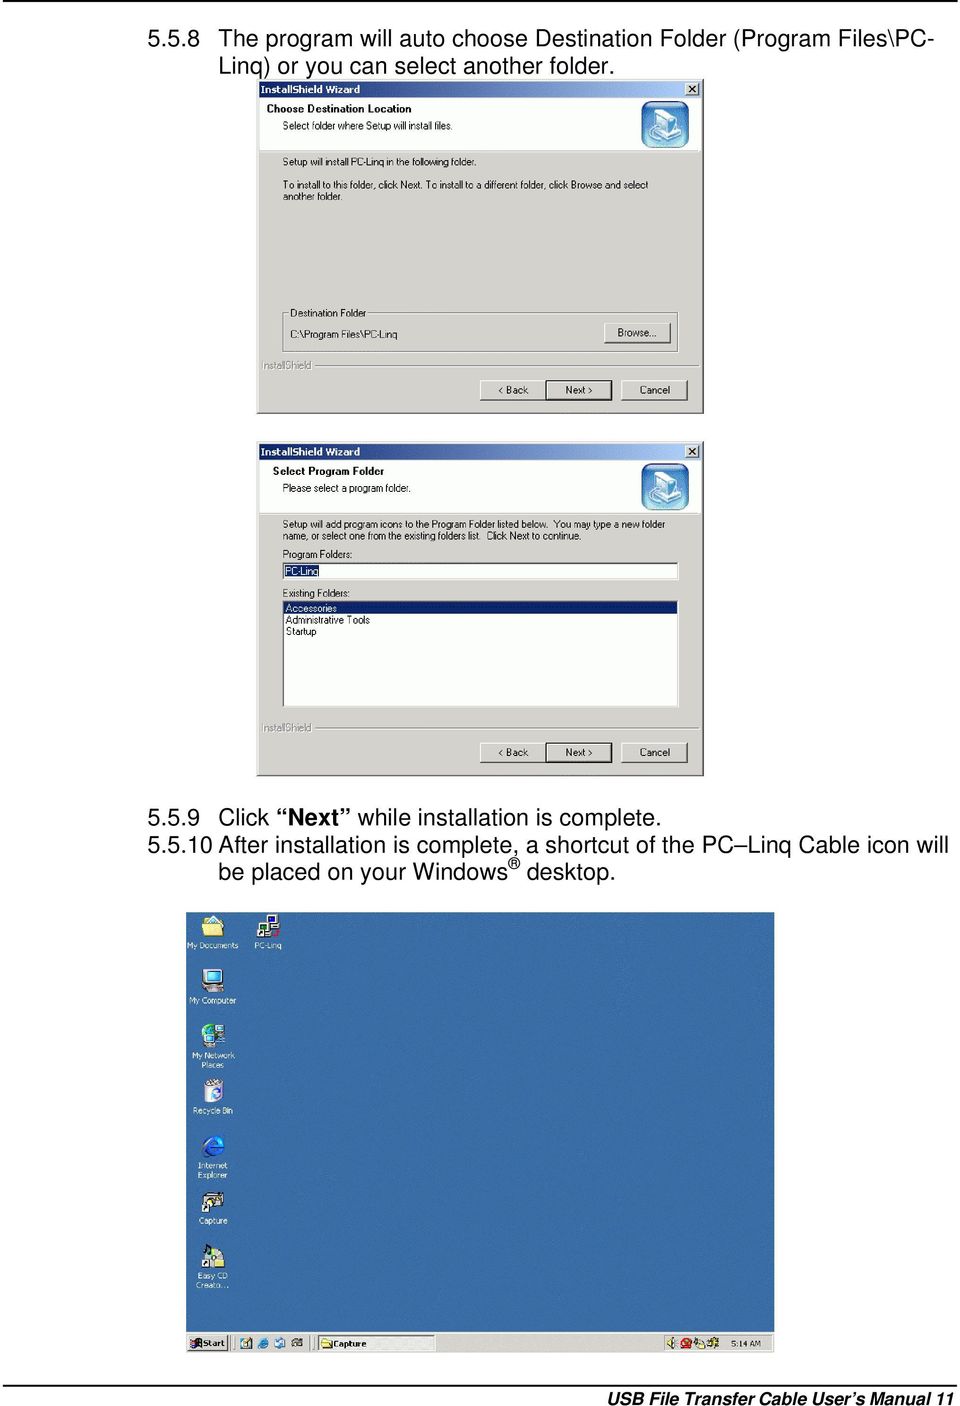 5.5.10 After installation is complete, a shortcut of the PC Linq Cable icon